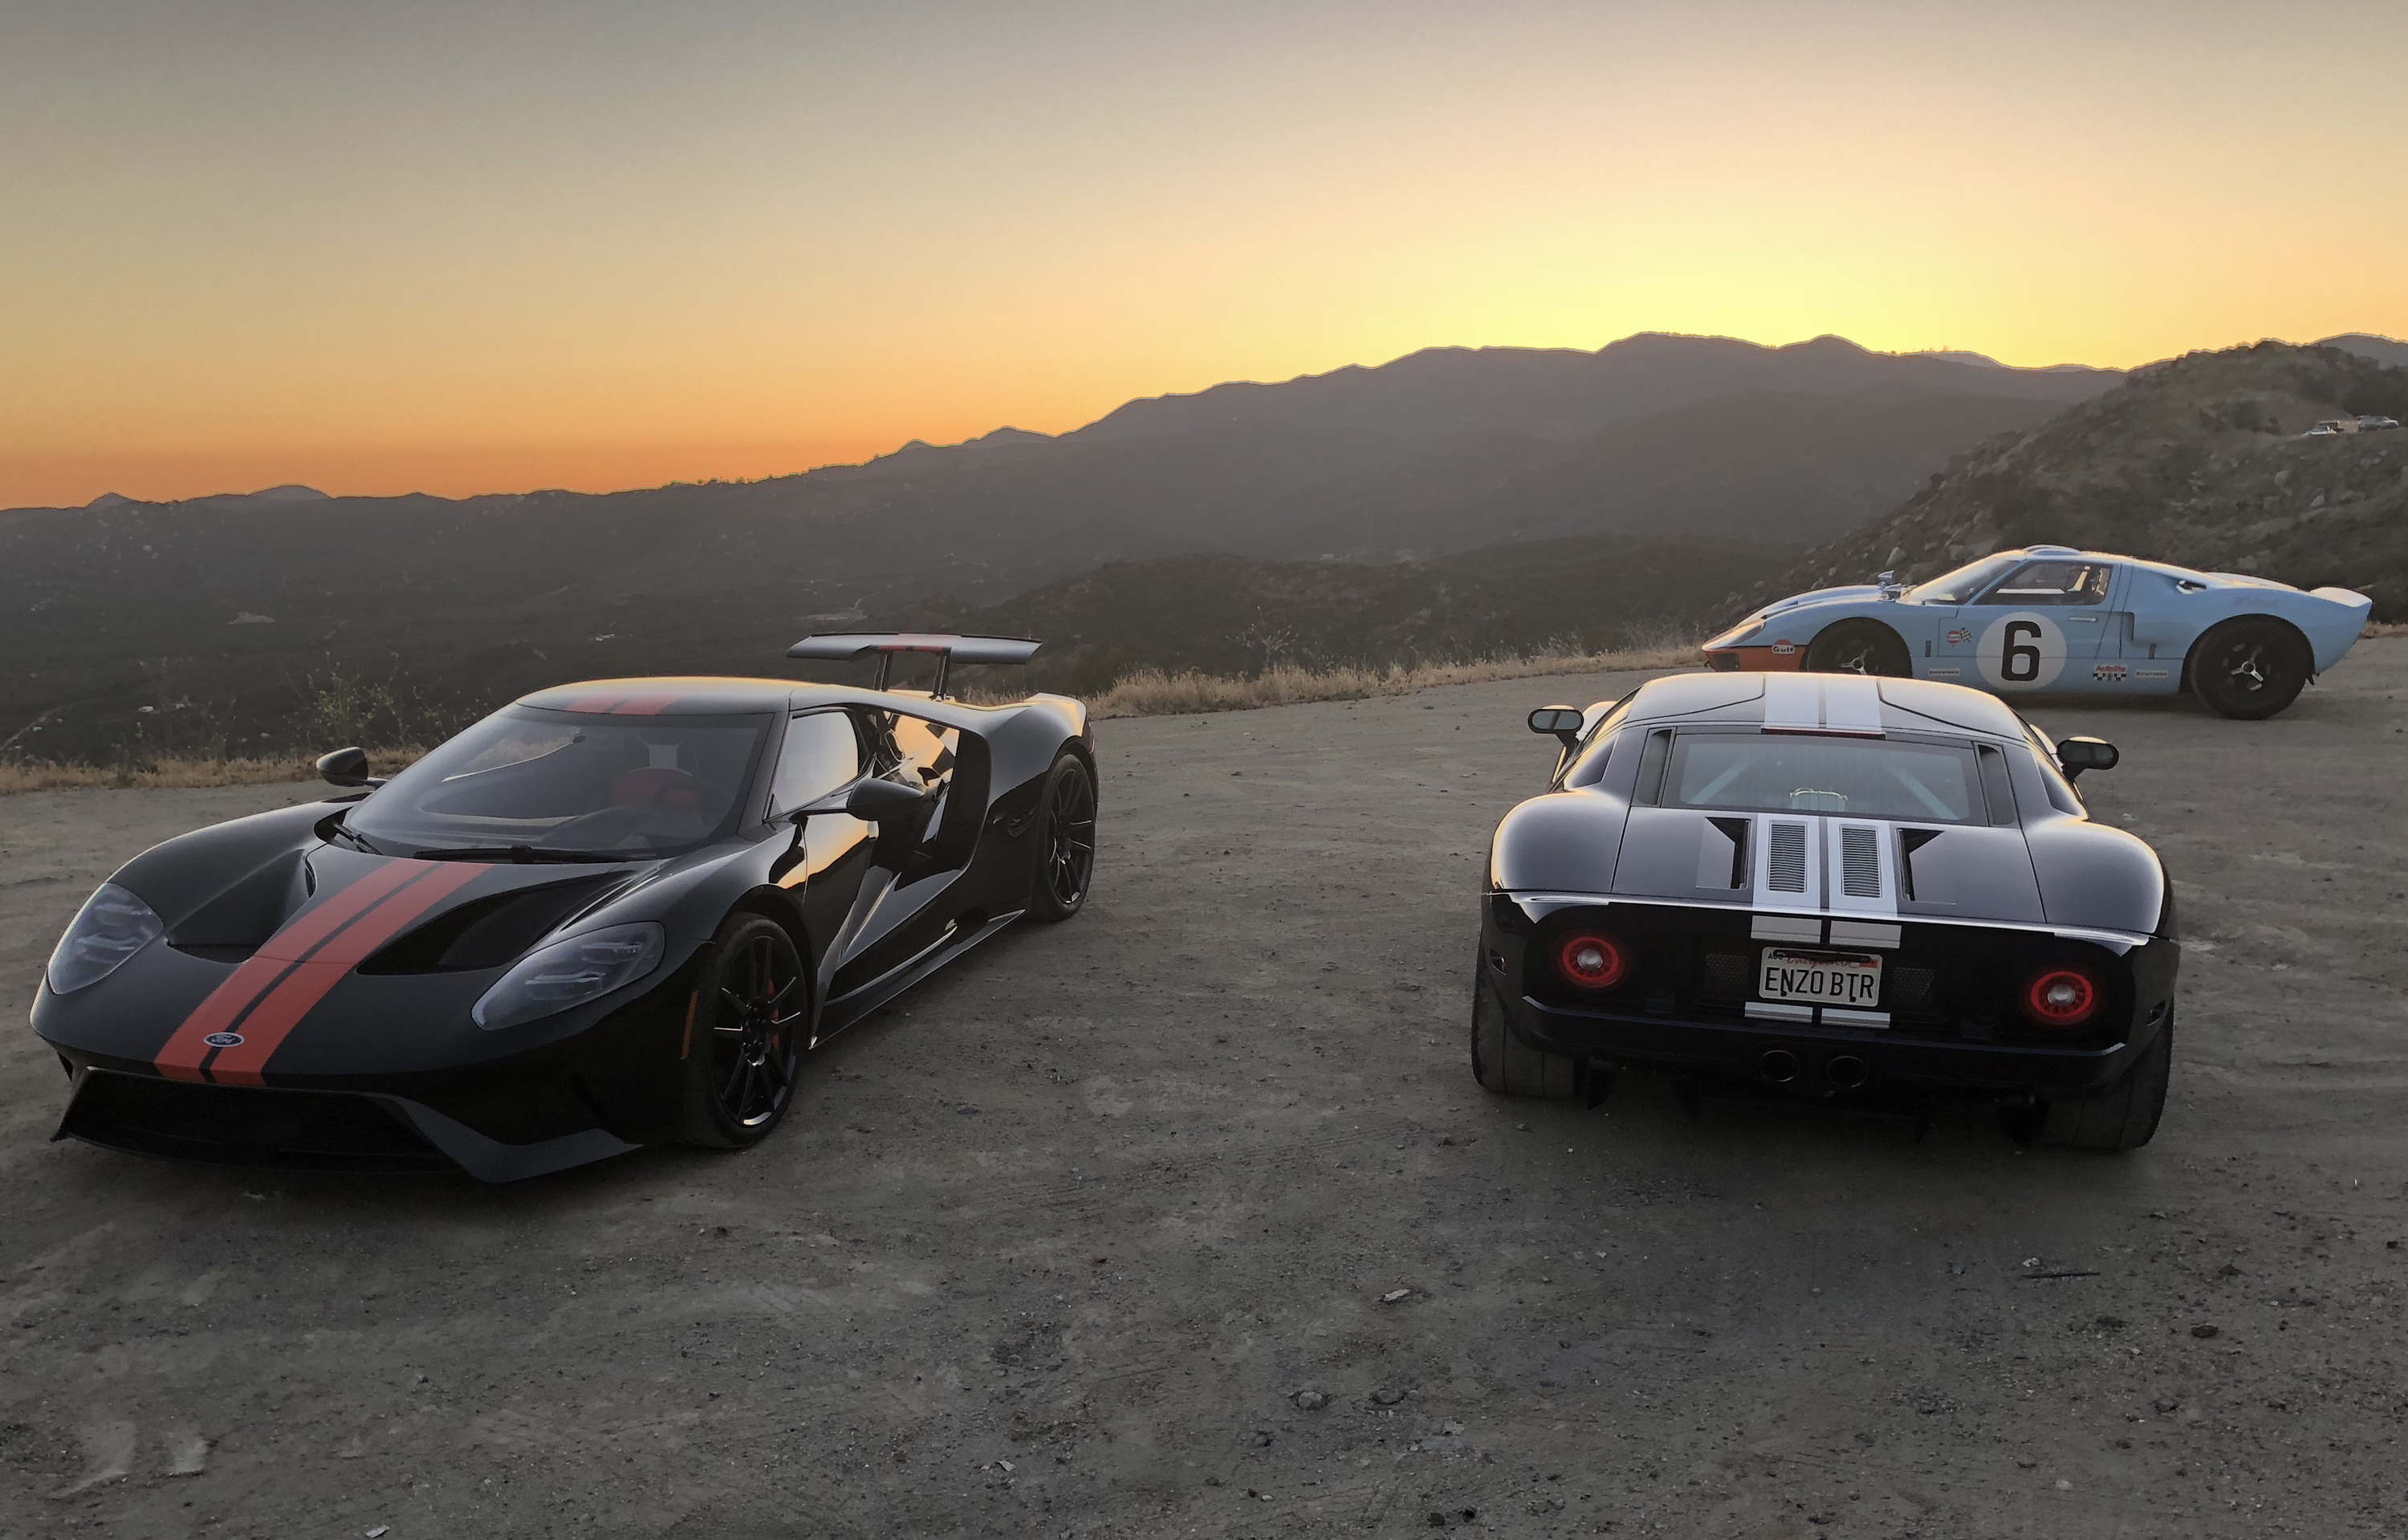 Ford GT Generations Sunset ENZO BTR Comparison Shoot